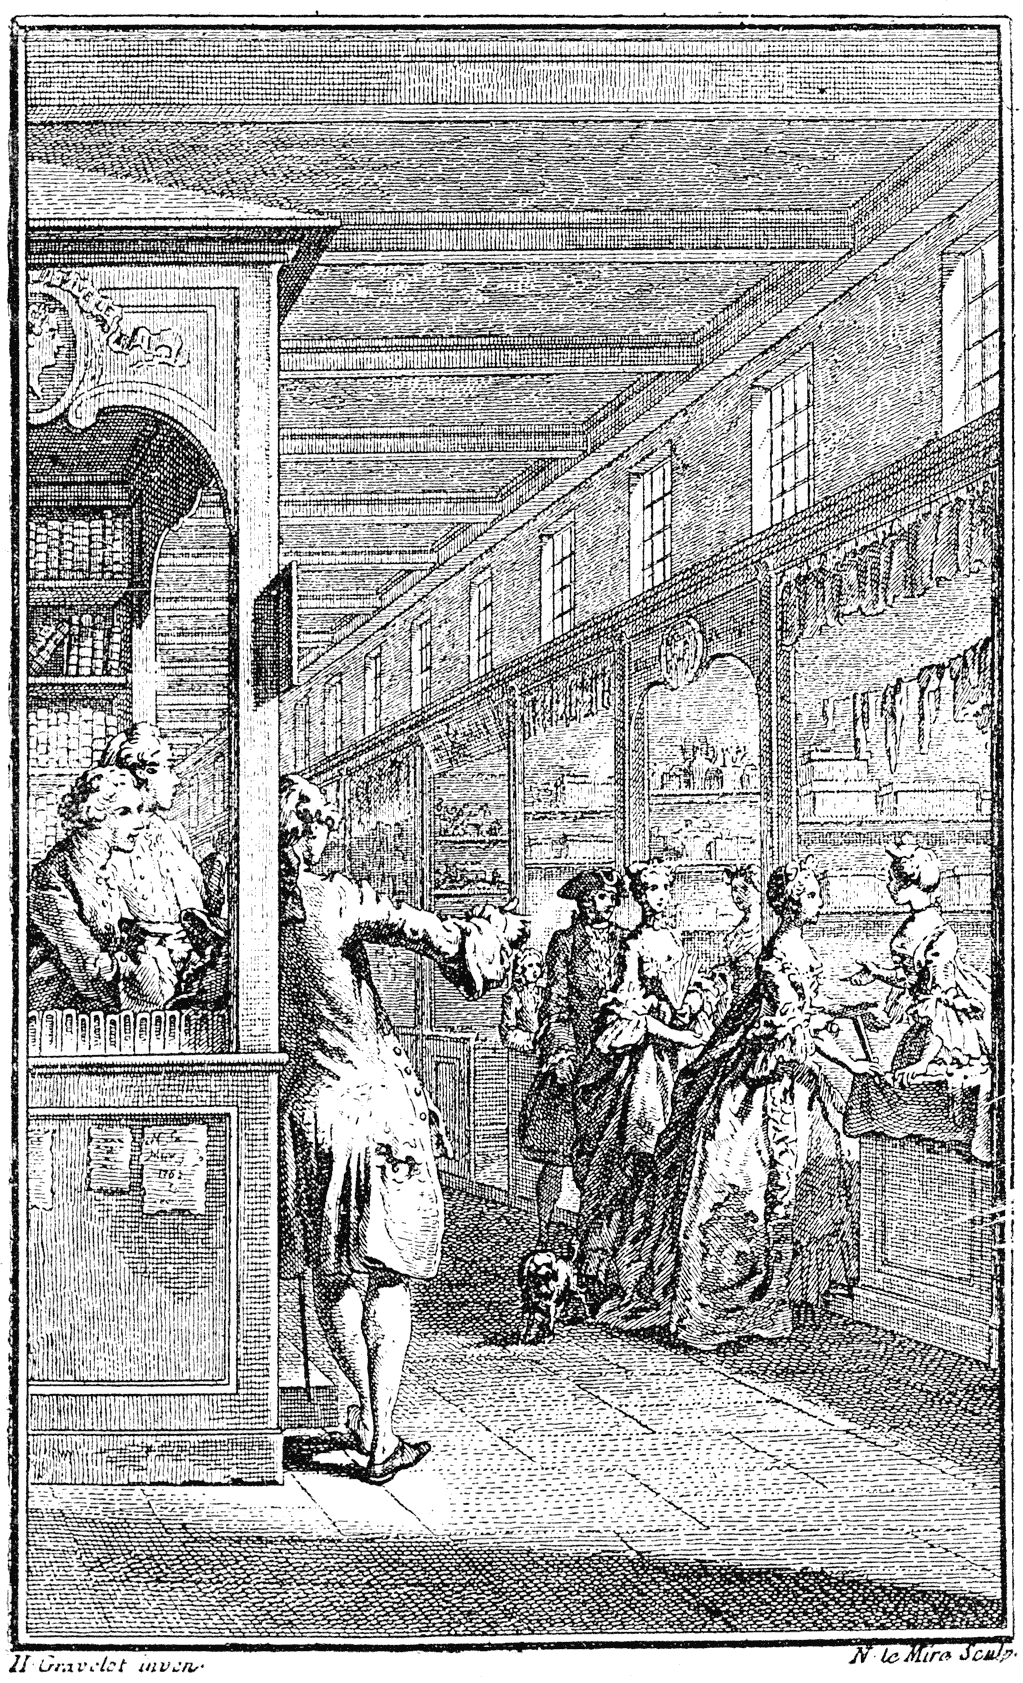 Mid-18th century vignette 'Galerie de Palais' illustrating bookselling, from P. Corneille's 'Theatre', by French artist  Gravelot.  From Henri Bouchot 'The Printed Book' 1887, page 195, published size in Bouchot  8.4cm wide by 13.9cm high.